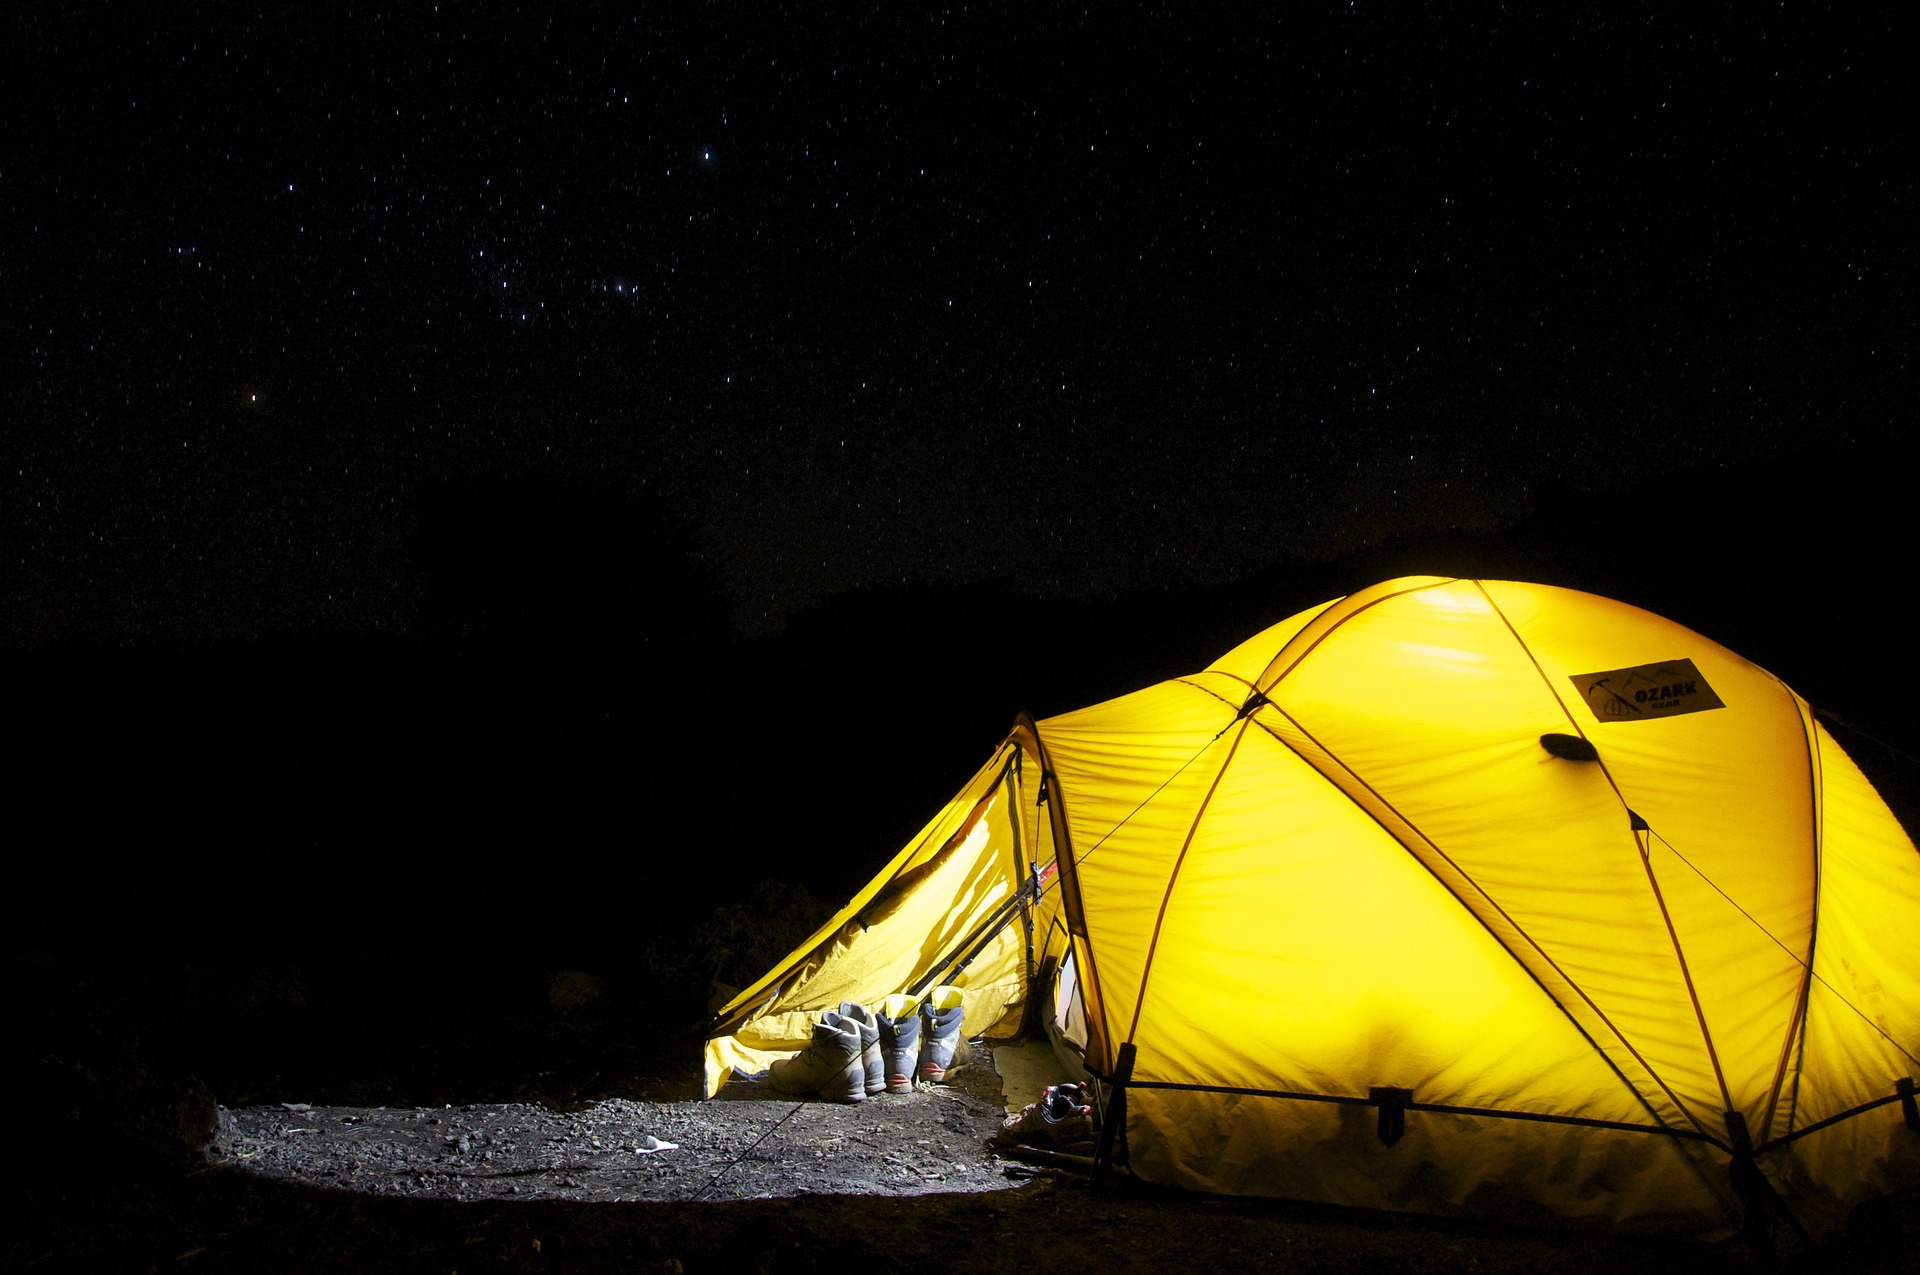 Camping Tents - A Guide To Choosing The Right One